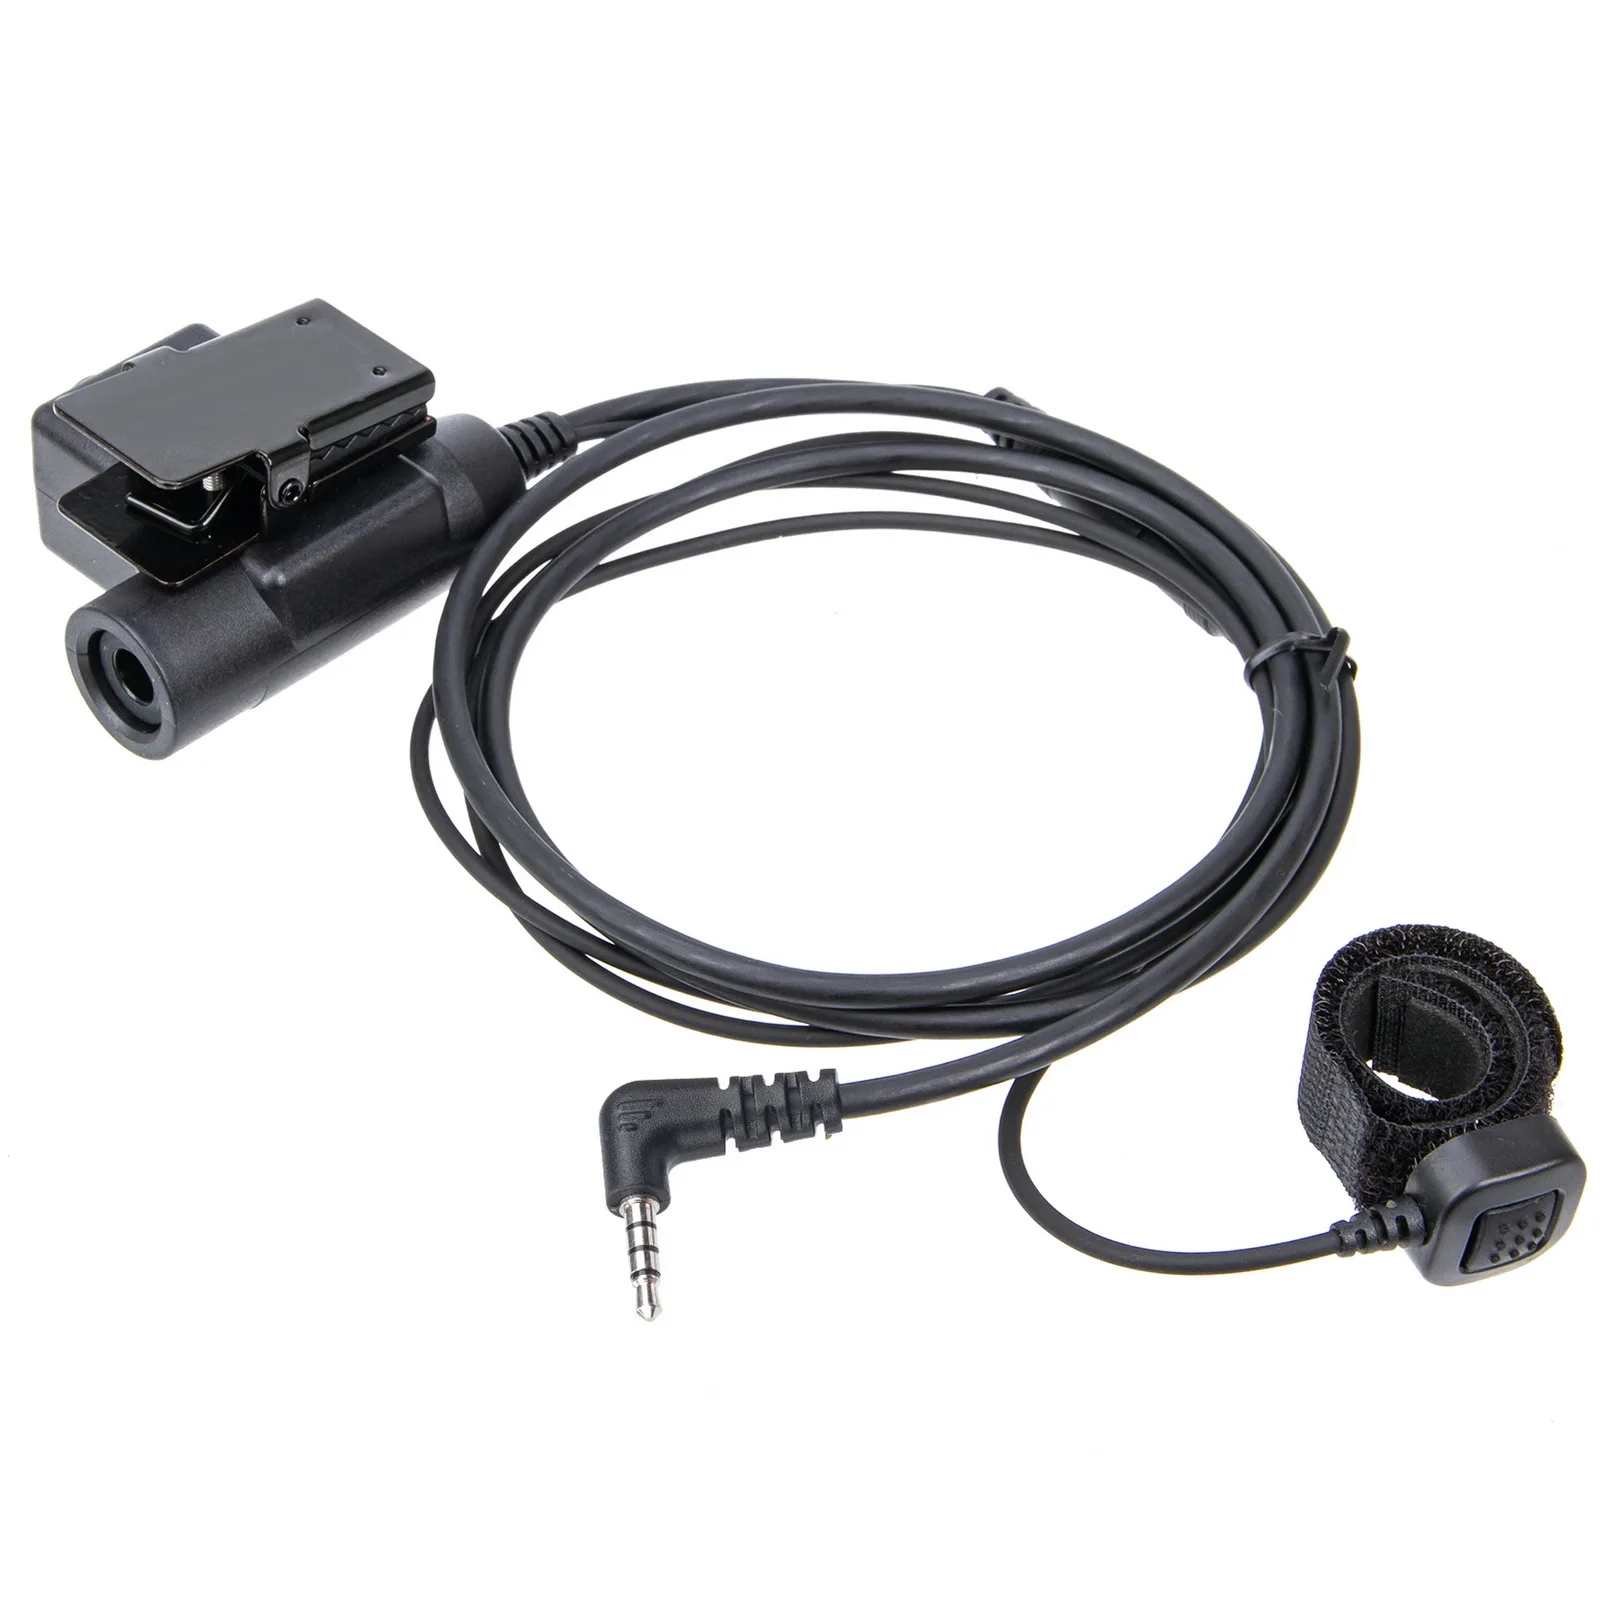 

for Xiaomi Two Way Radio U94 PTT Adapter U94 and Finger Microphone PTT High Strength